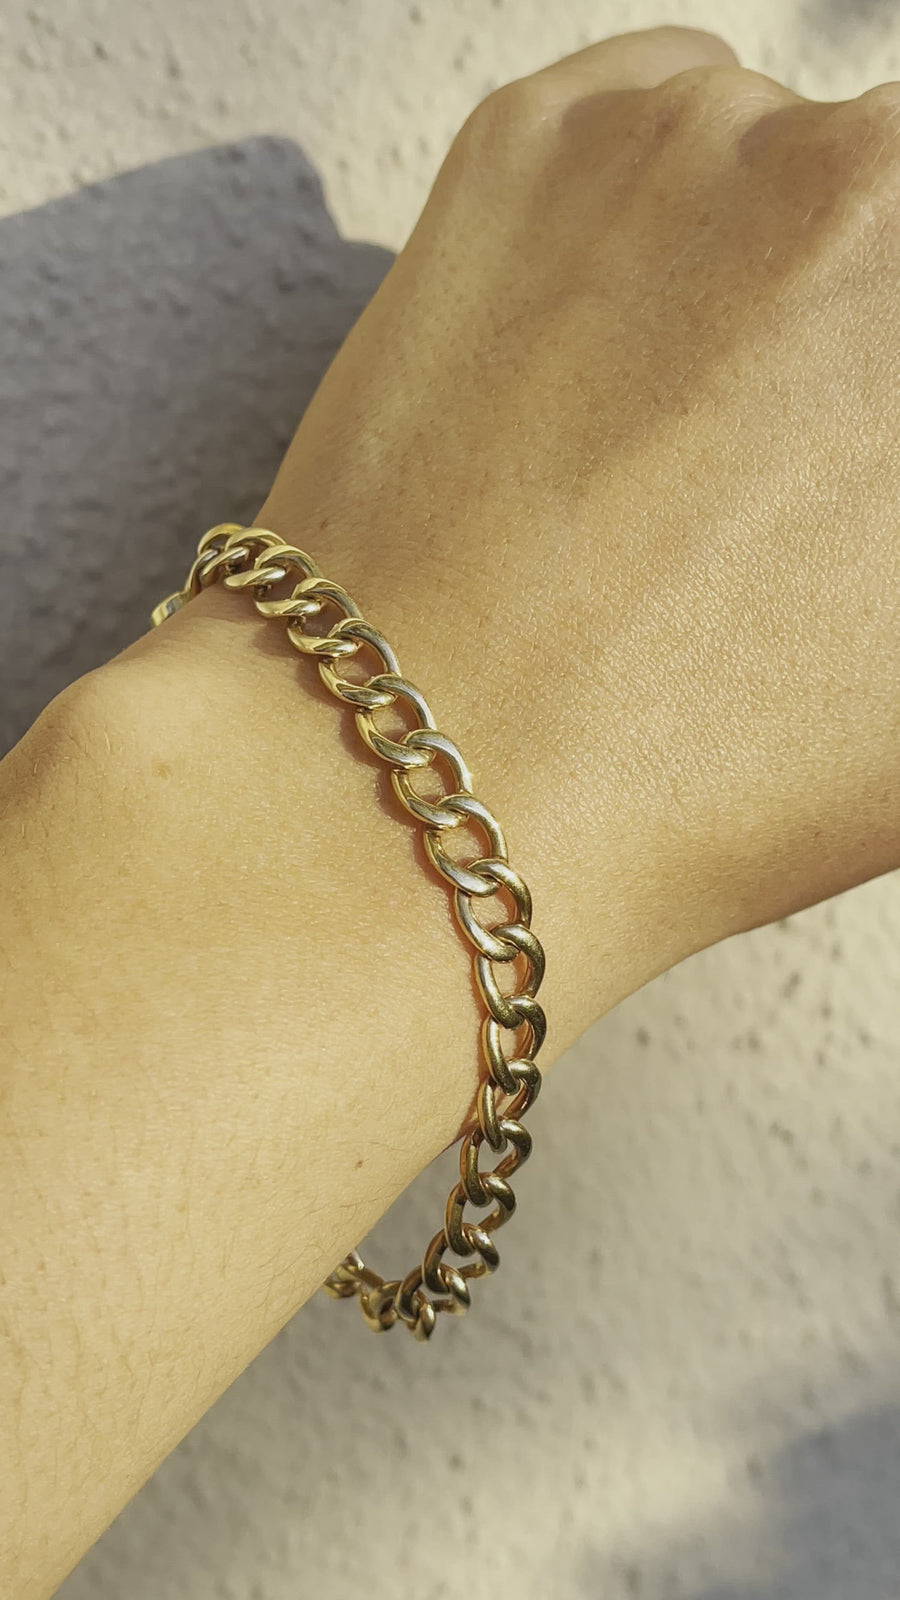 Video of Vintage 14k Yellow Gold 7.5-Inch Cuban-Link Bracelet with Spring Ring Clasp on Wrist